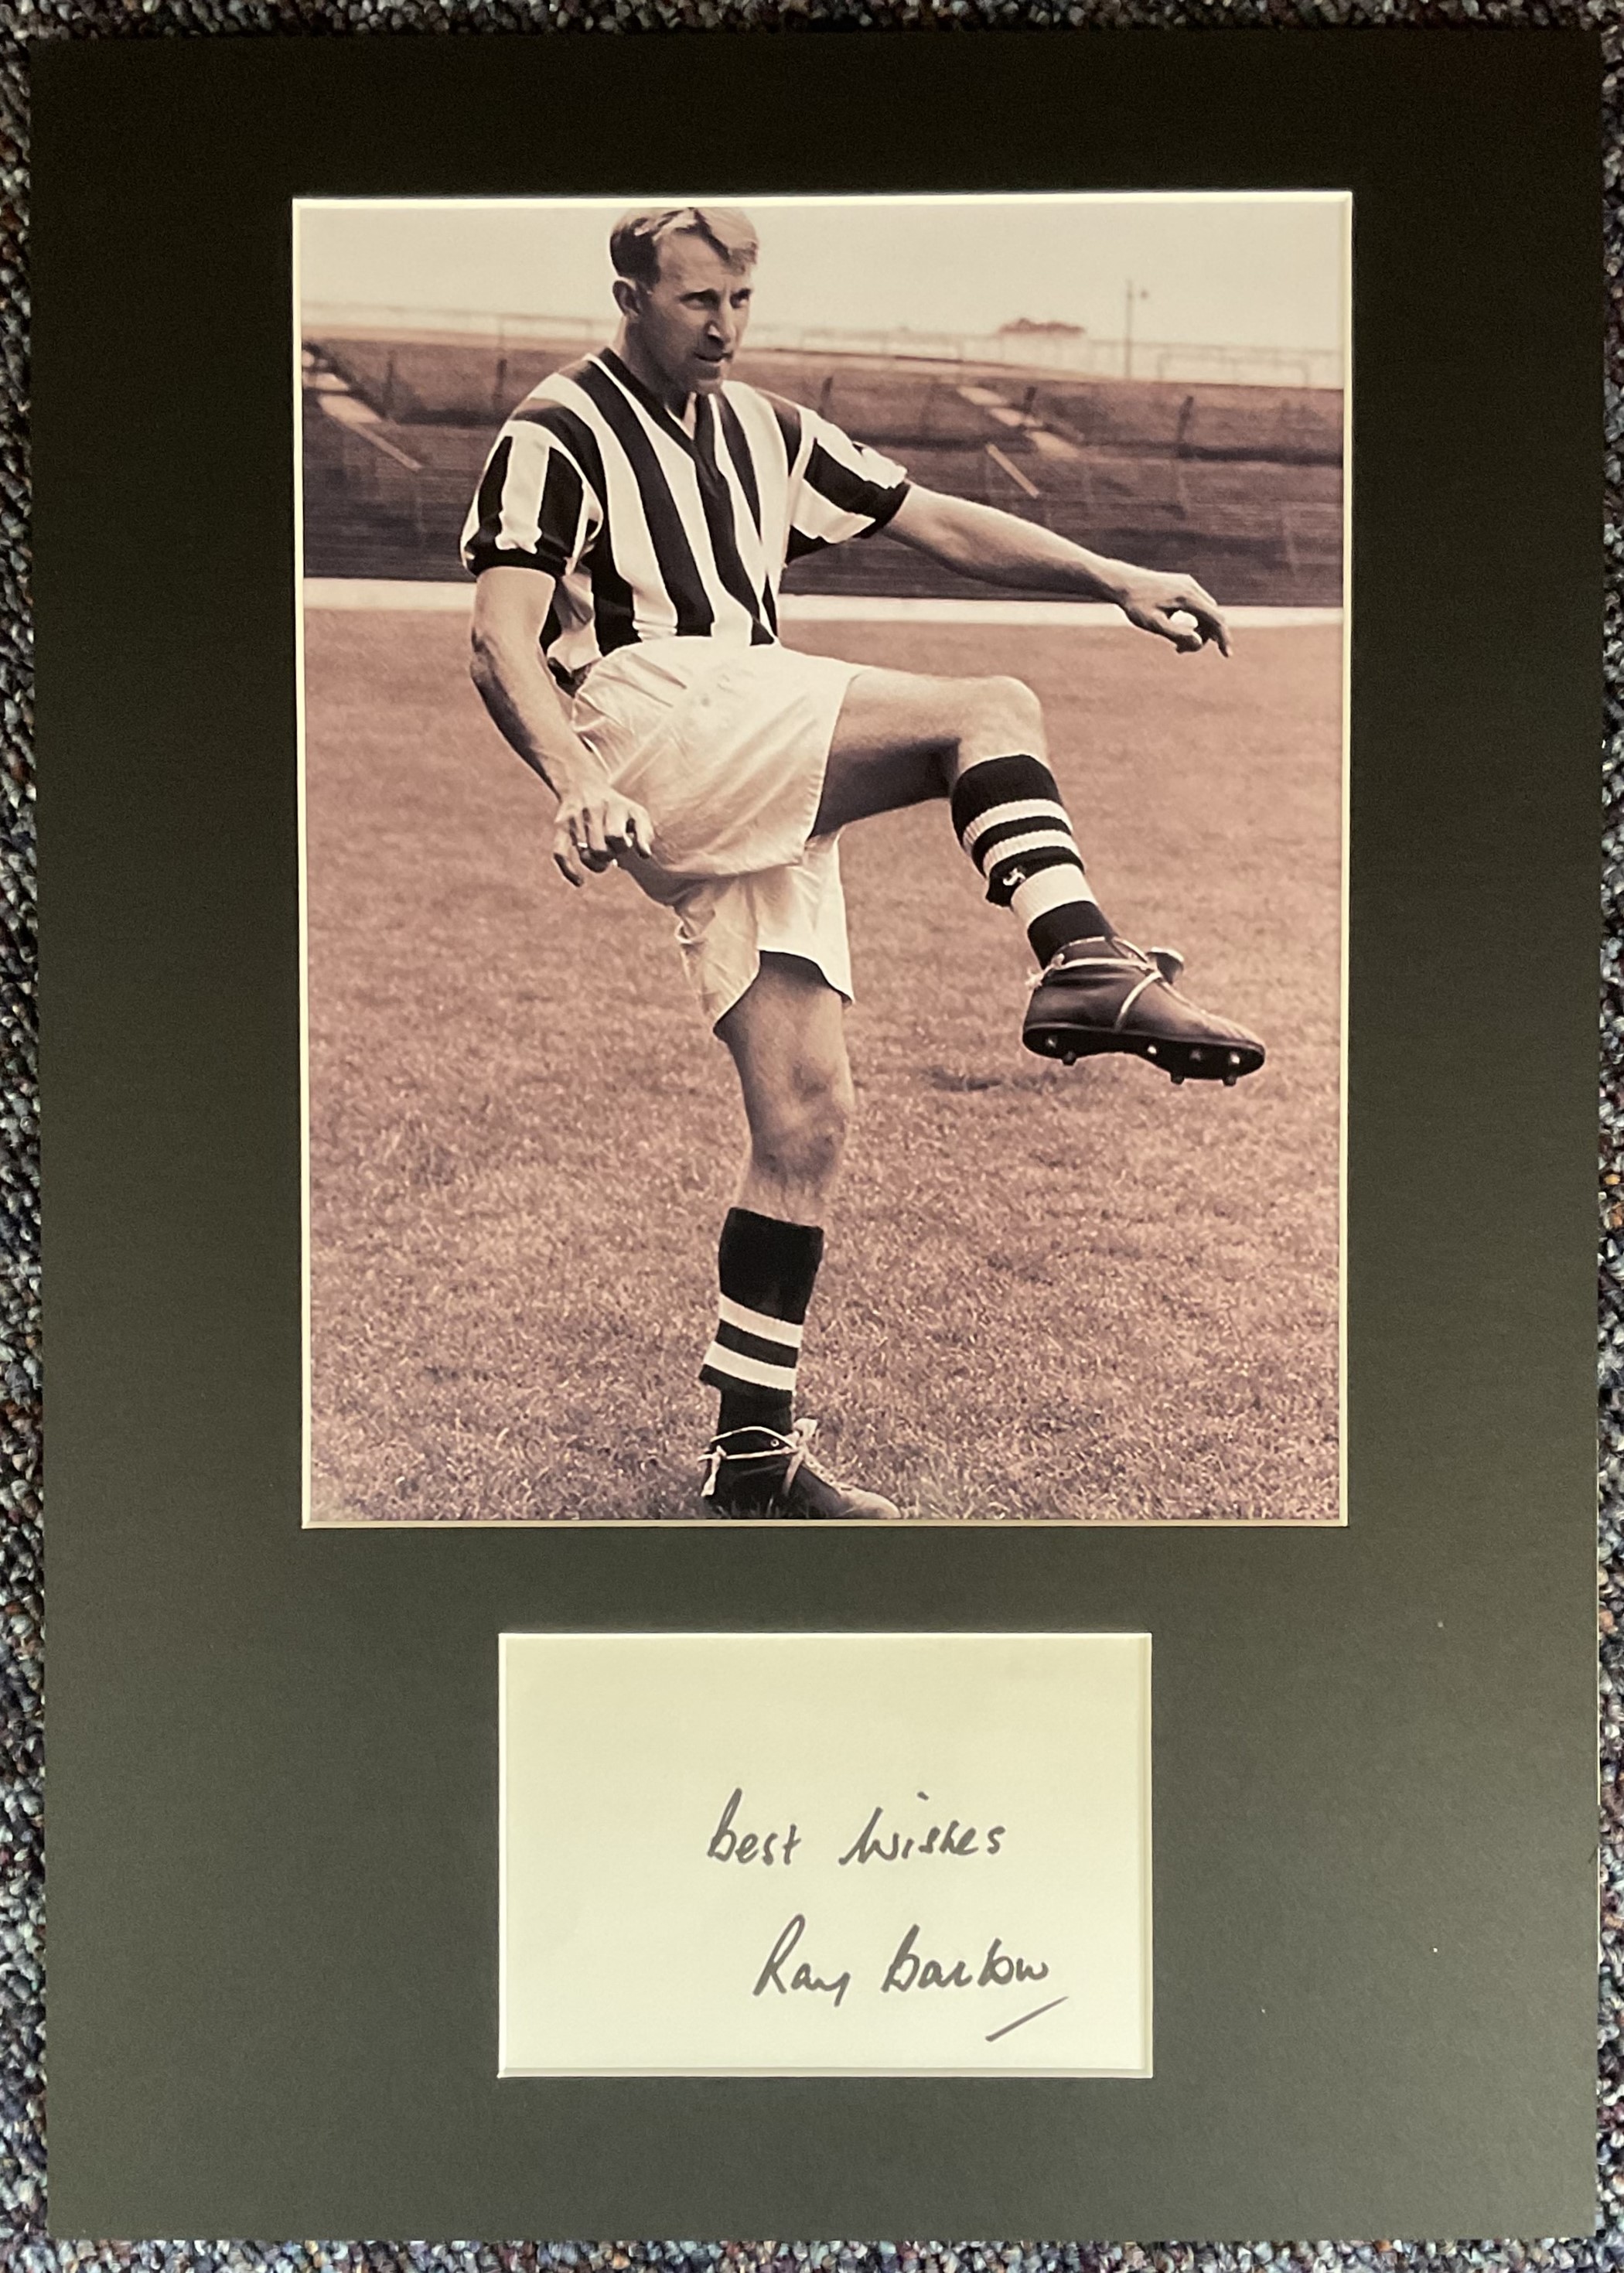 Football Ray Barlow Signed White Signature Card, With Colour Photo, Mounted Professionally to an